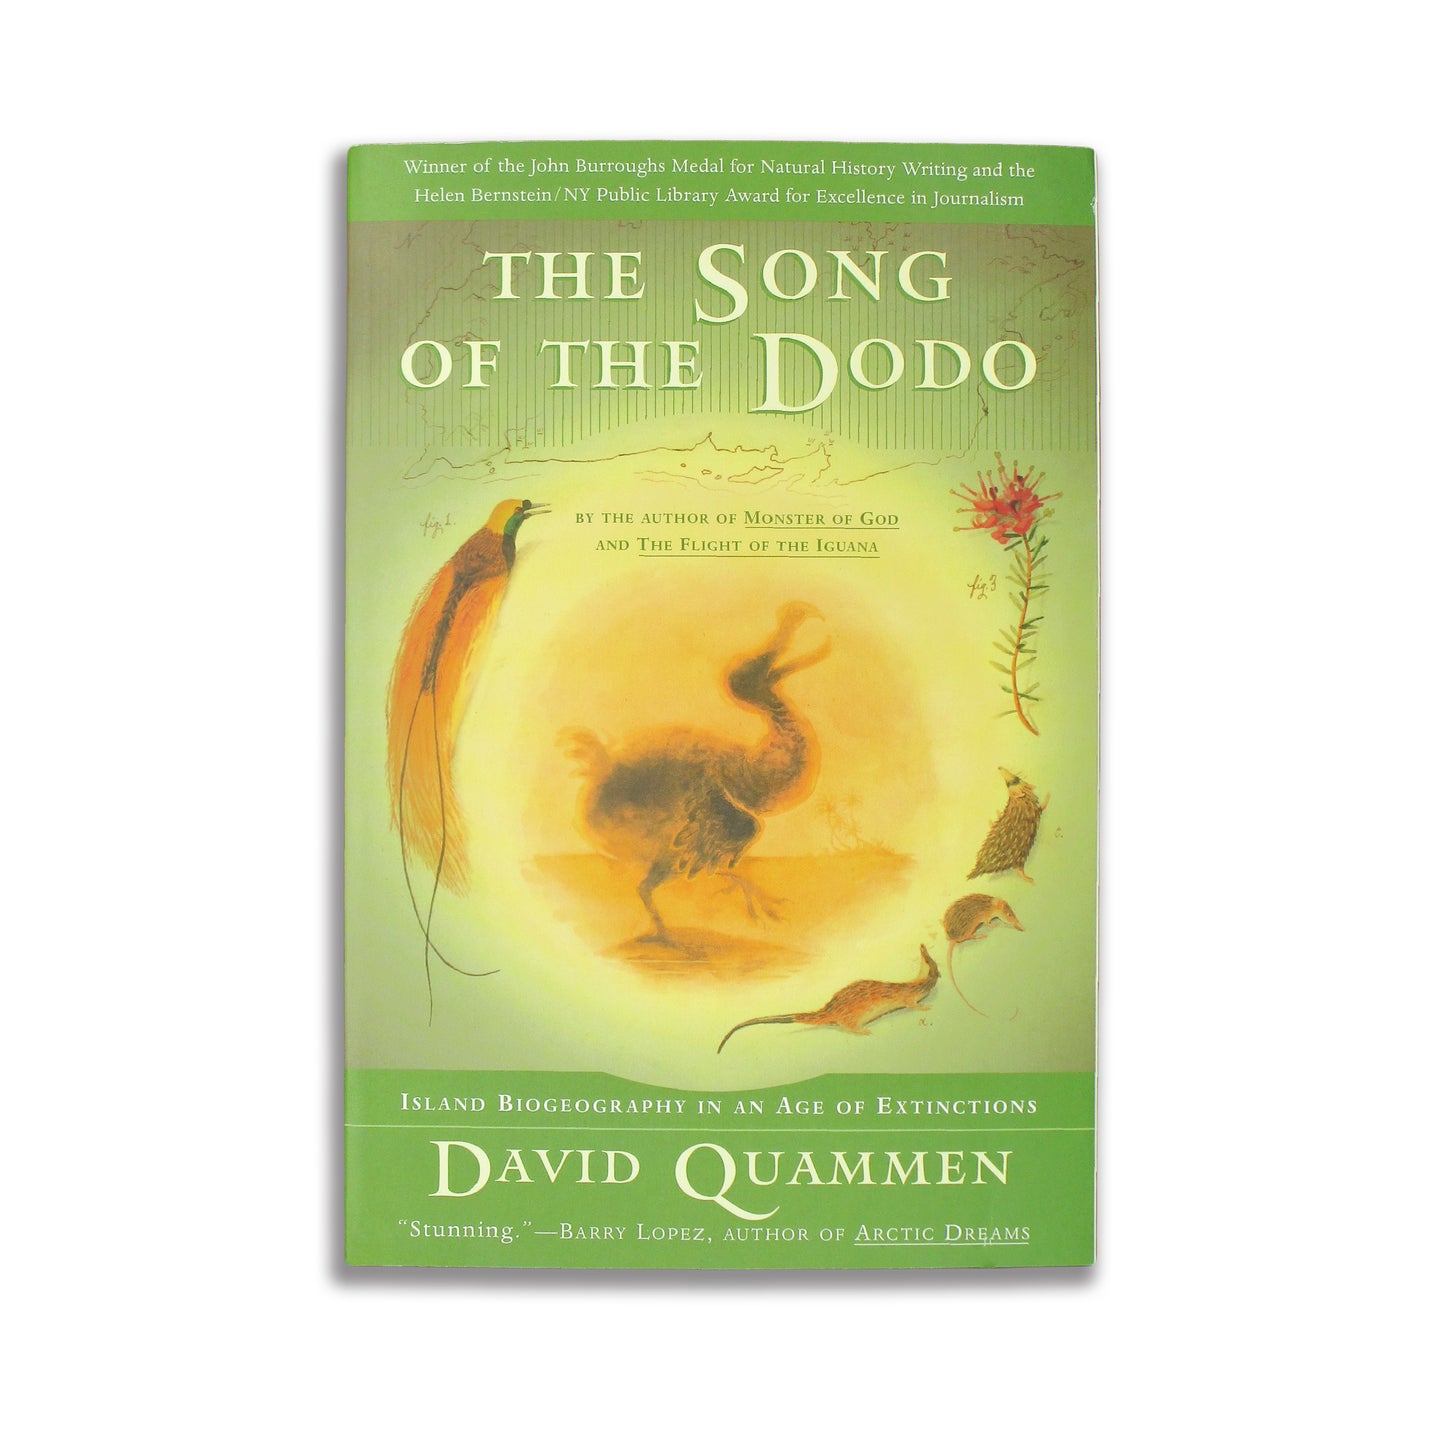 The Song of the Dodo: Island Biogeography in an Age of Extinctions - David Quammen (paperback)